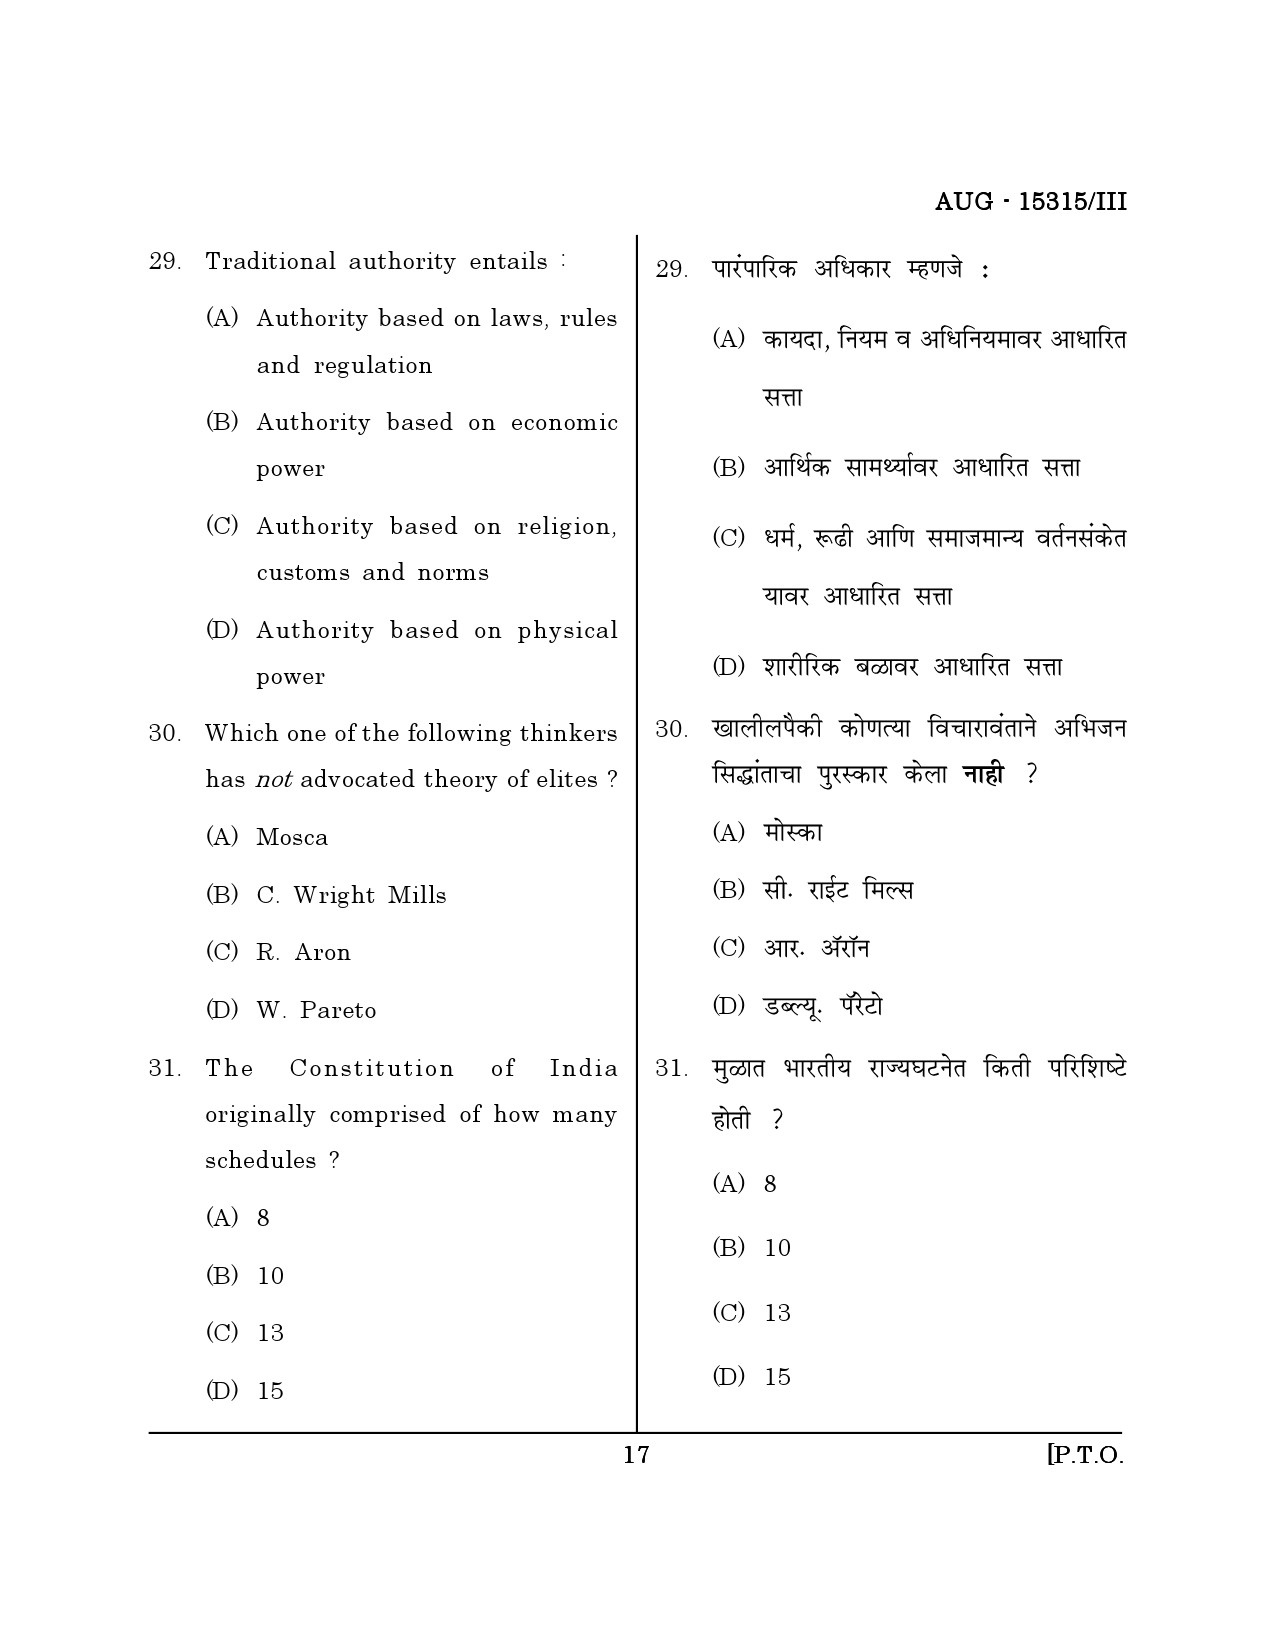 Maharashtra SET Political Science Question Paper III August 2015 16